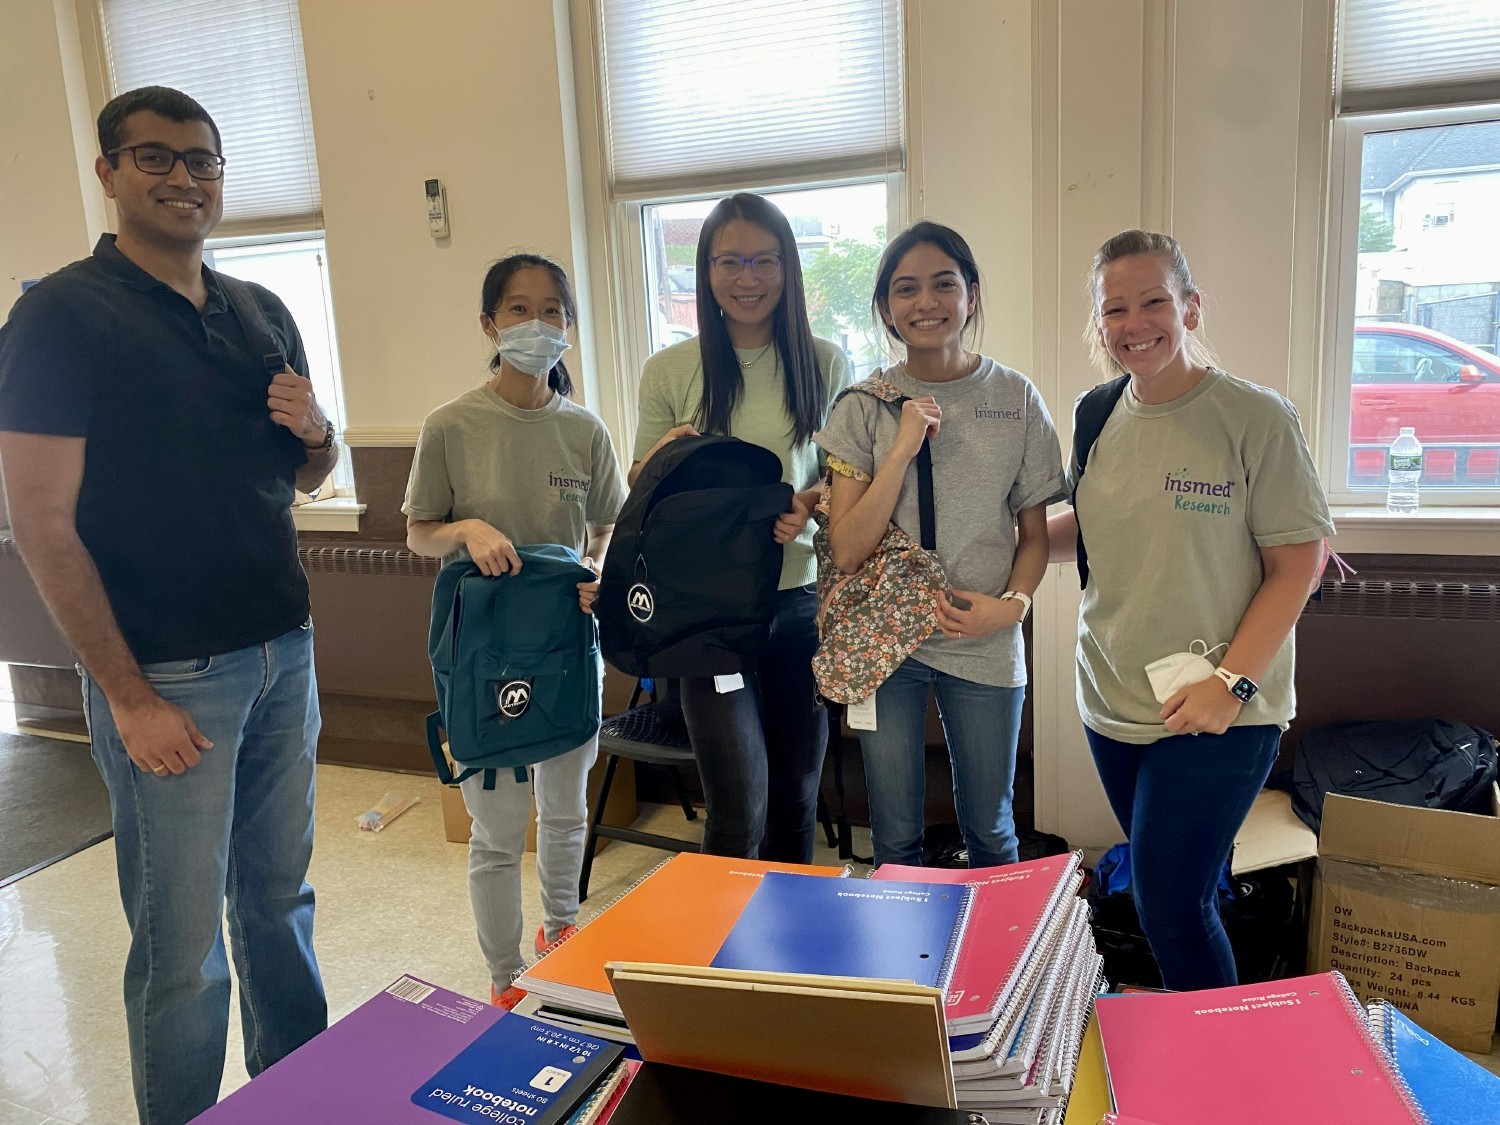 Insmed team members volunteering at a back-to-school supplies drive